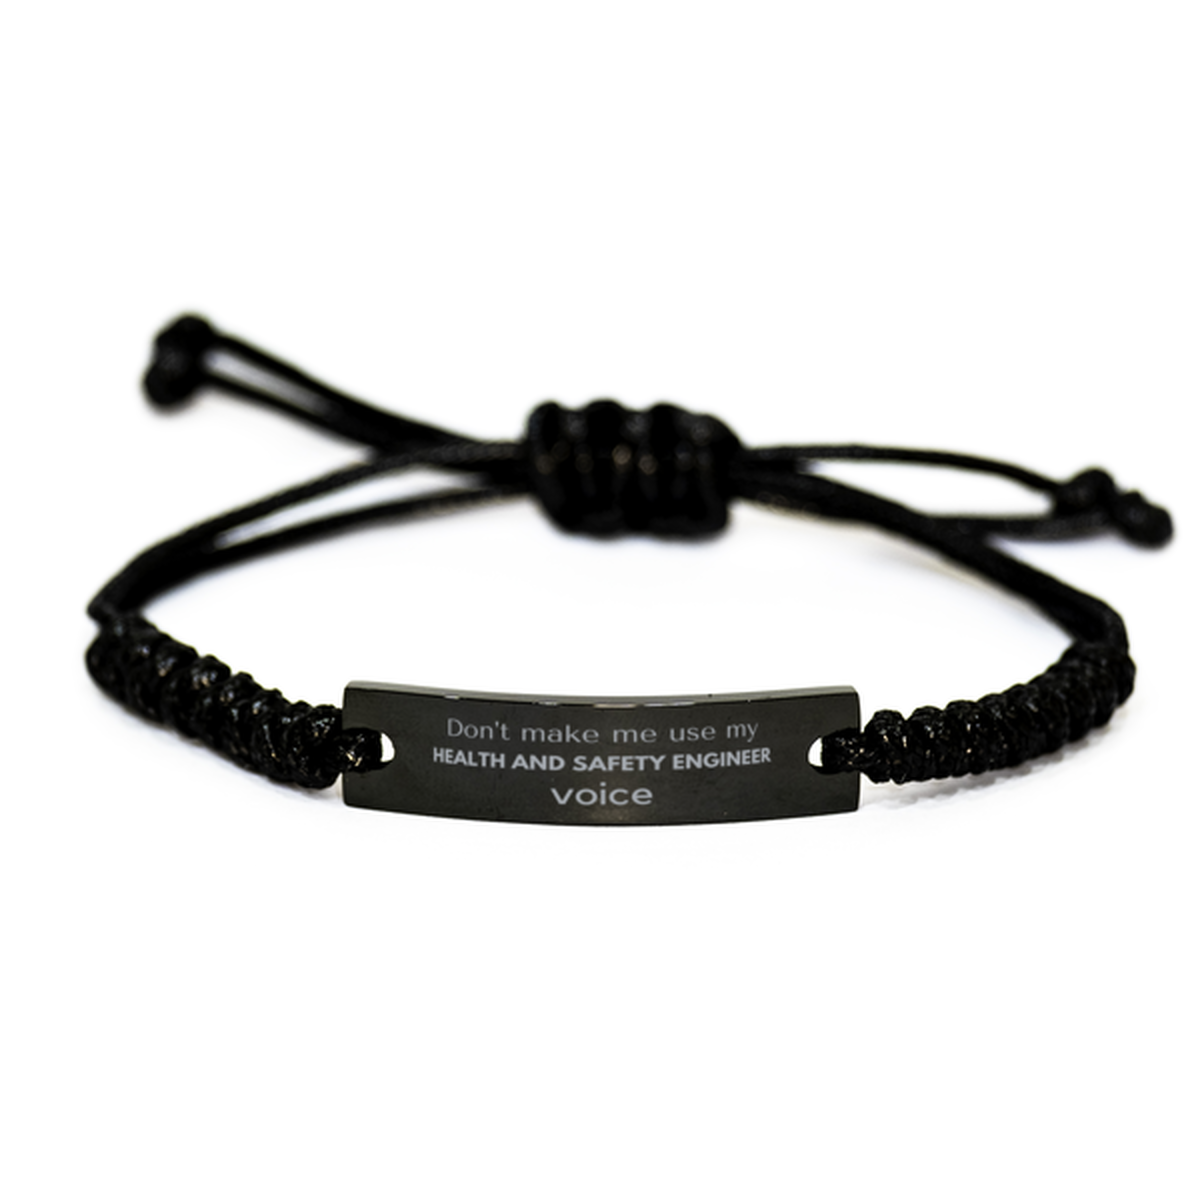 Don't make me use my Health and Safety Engineer voice, Sarcasm Health and Safety Engineer Gifts, Christmas Health and Safety Engineer Black Rope Bracelet Birthday Unique Gifts For Health and Safety Engineer Coworkers, Men, Women, Colleague, Friends